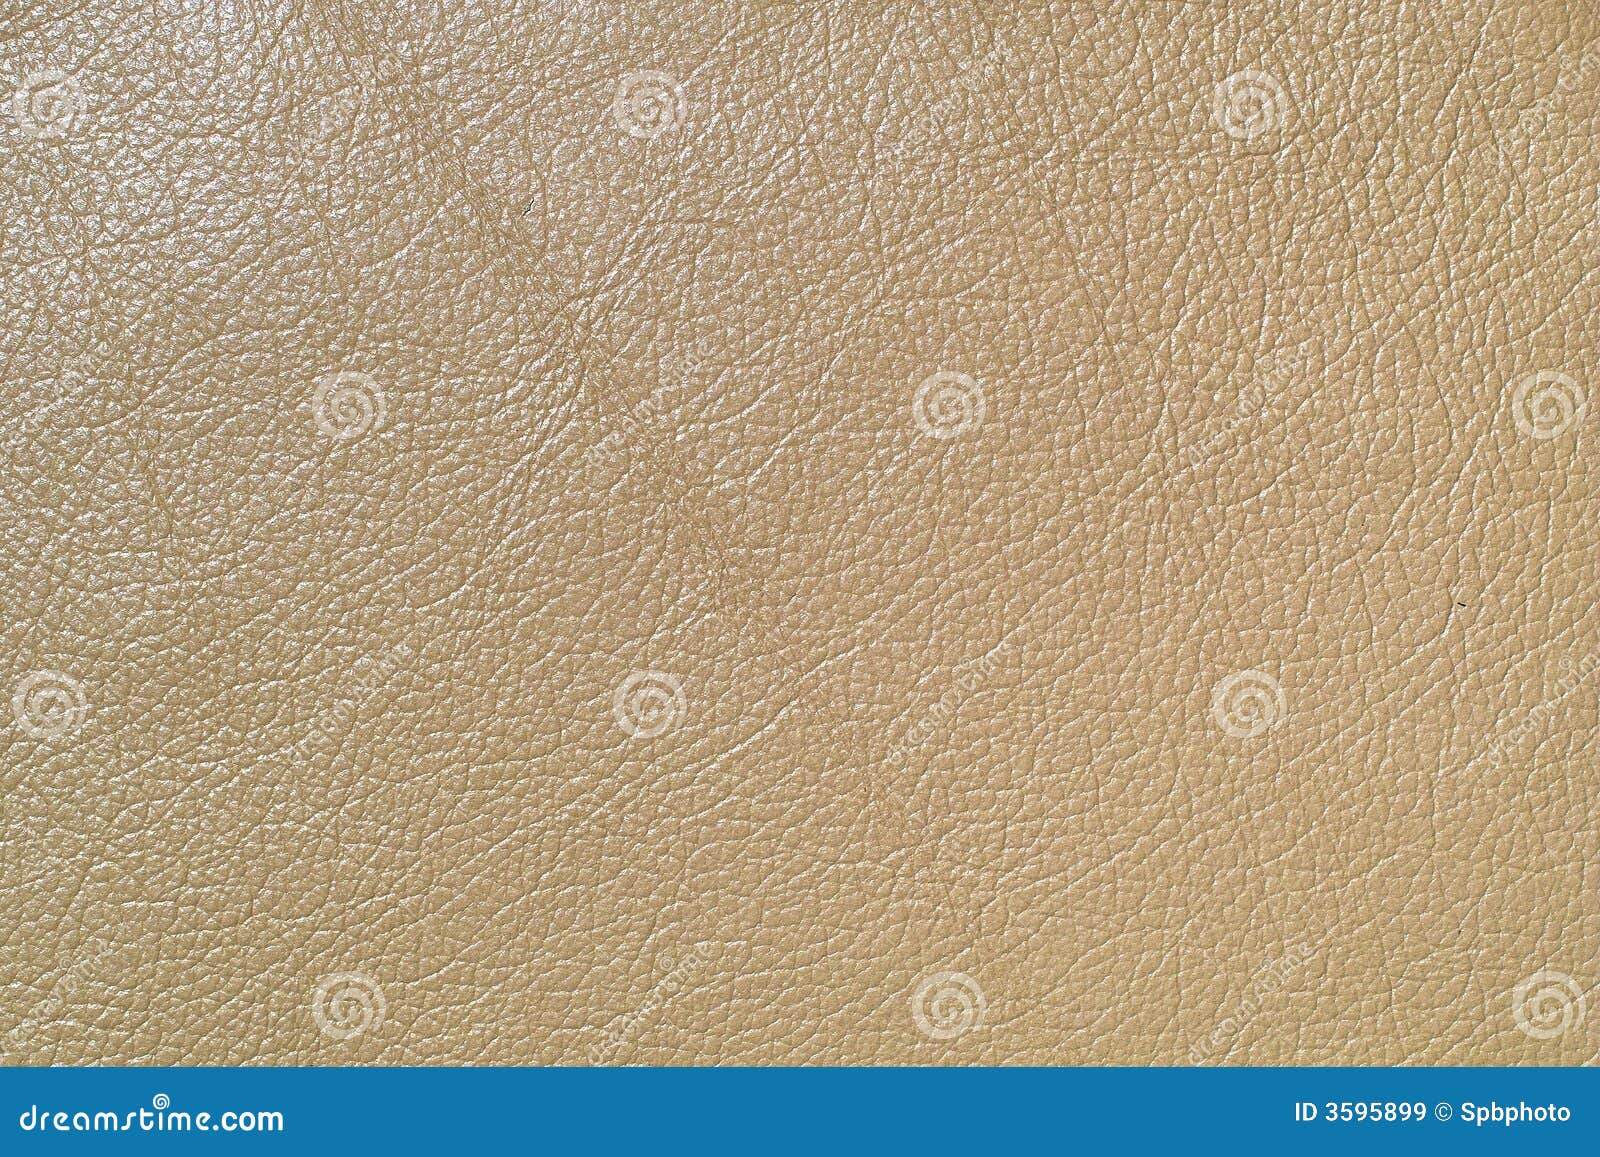 Beige leather stock image. Image of brown, pattern, beige - 3595899